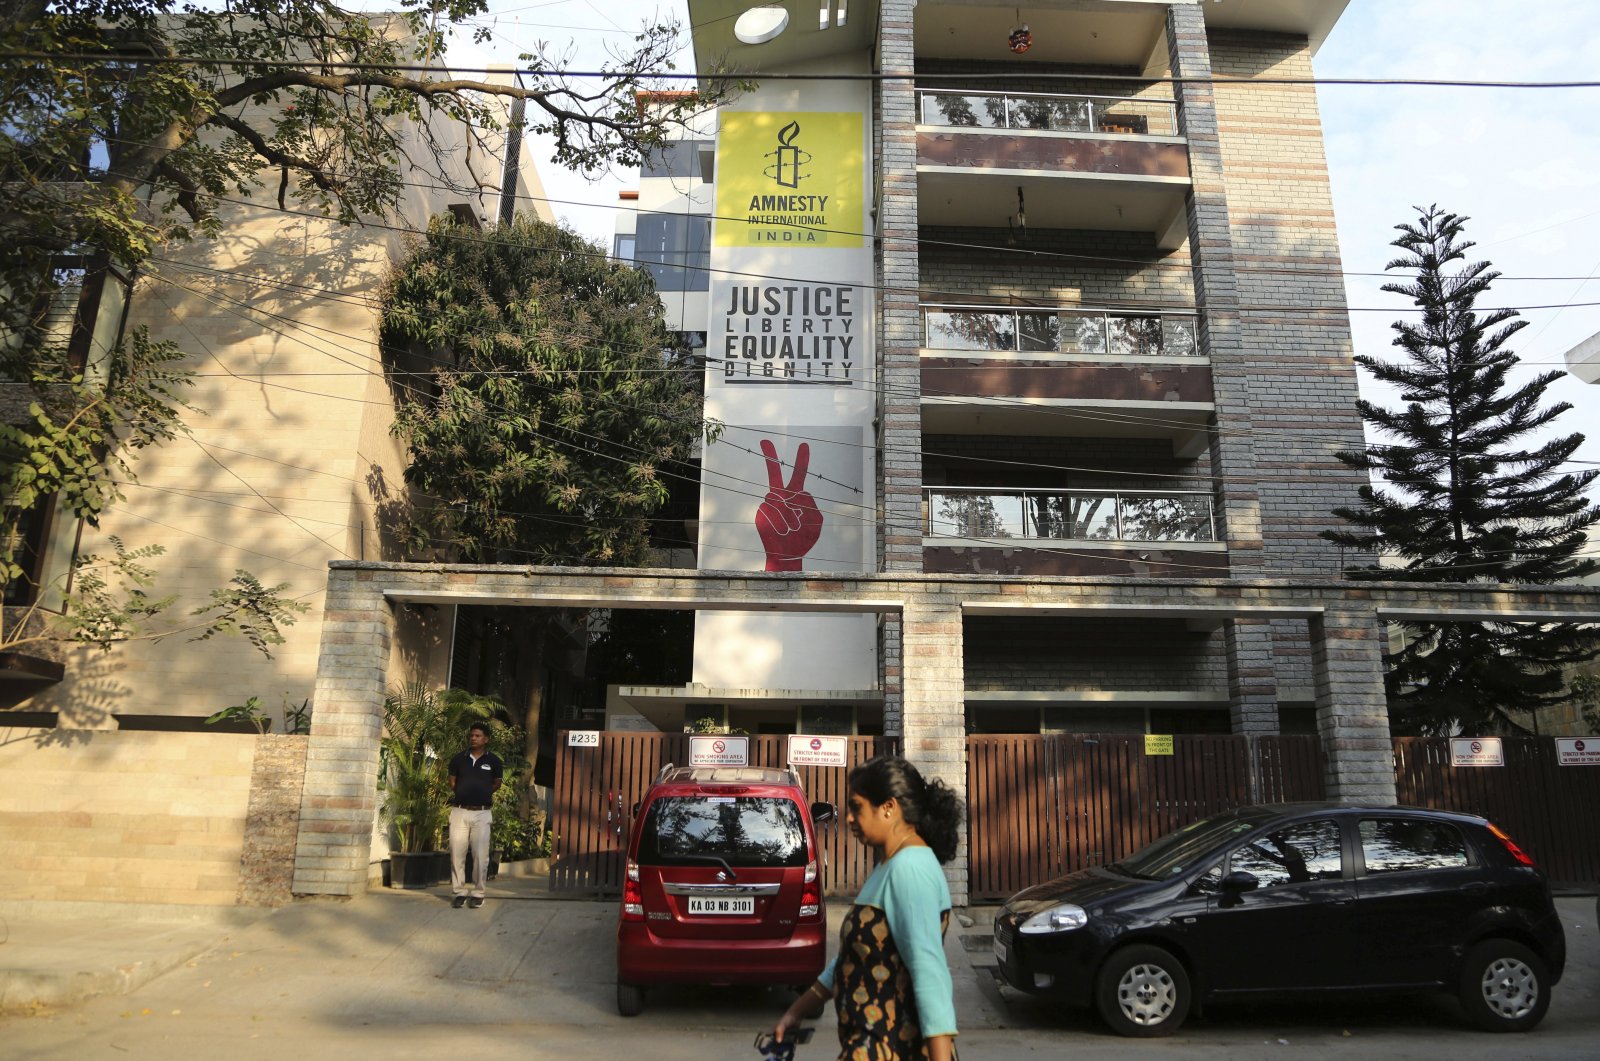 In this file photo, a woman walks past the Amnesty International India headquarters in Bangalore, India, Feb. 5, 2019. (AP Photo)